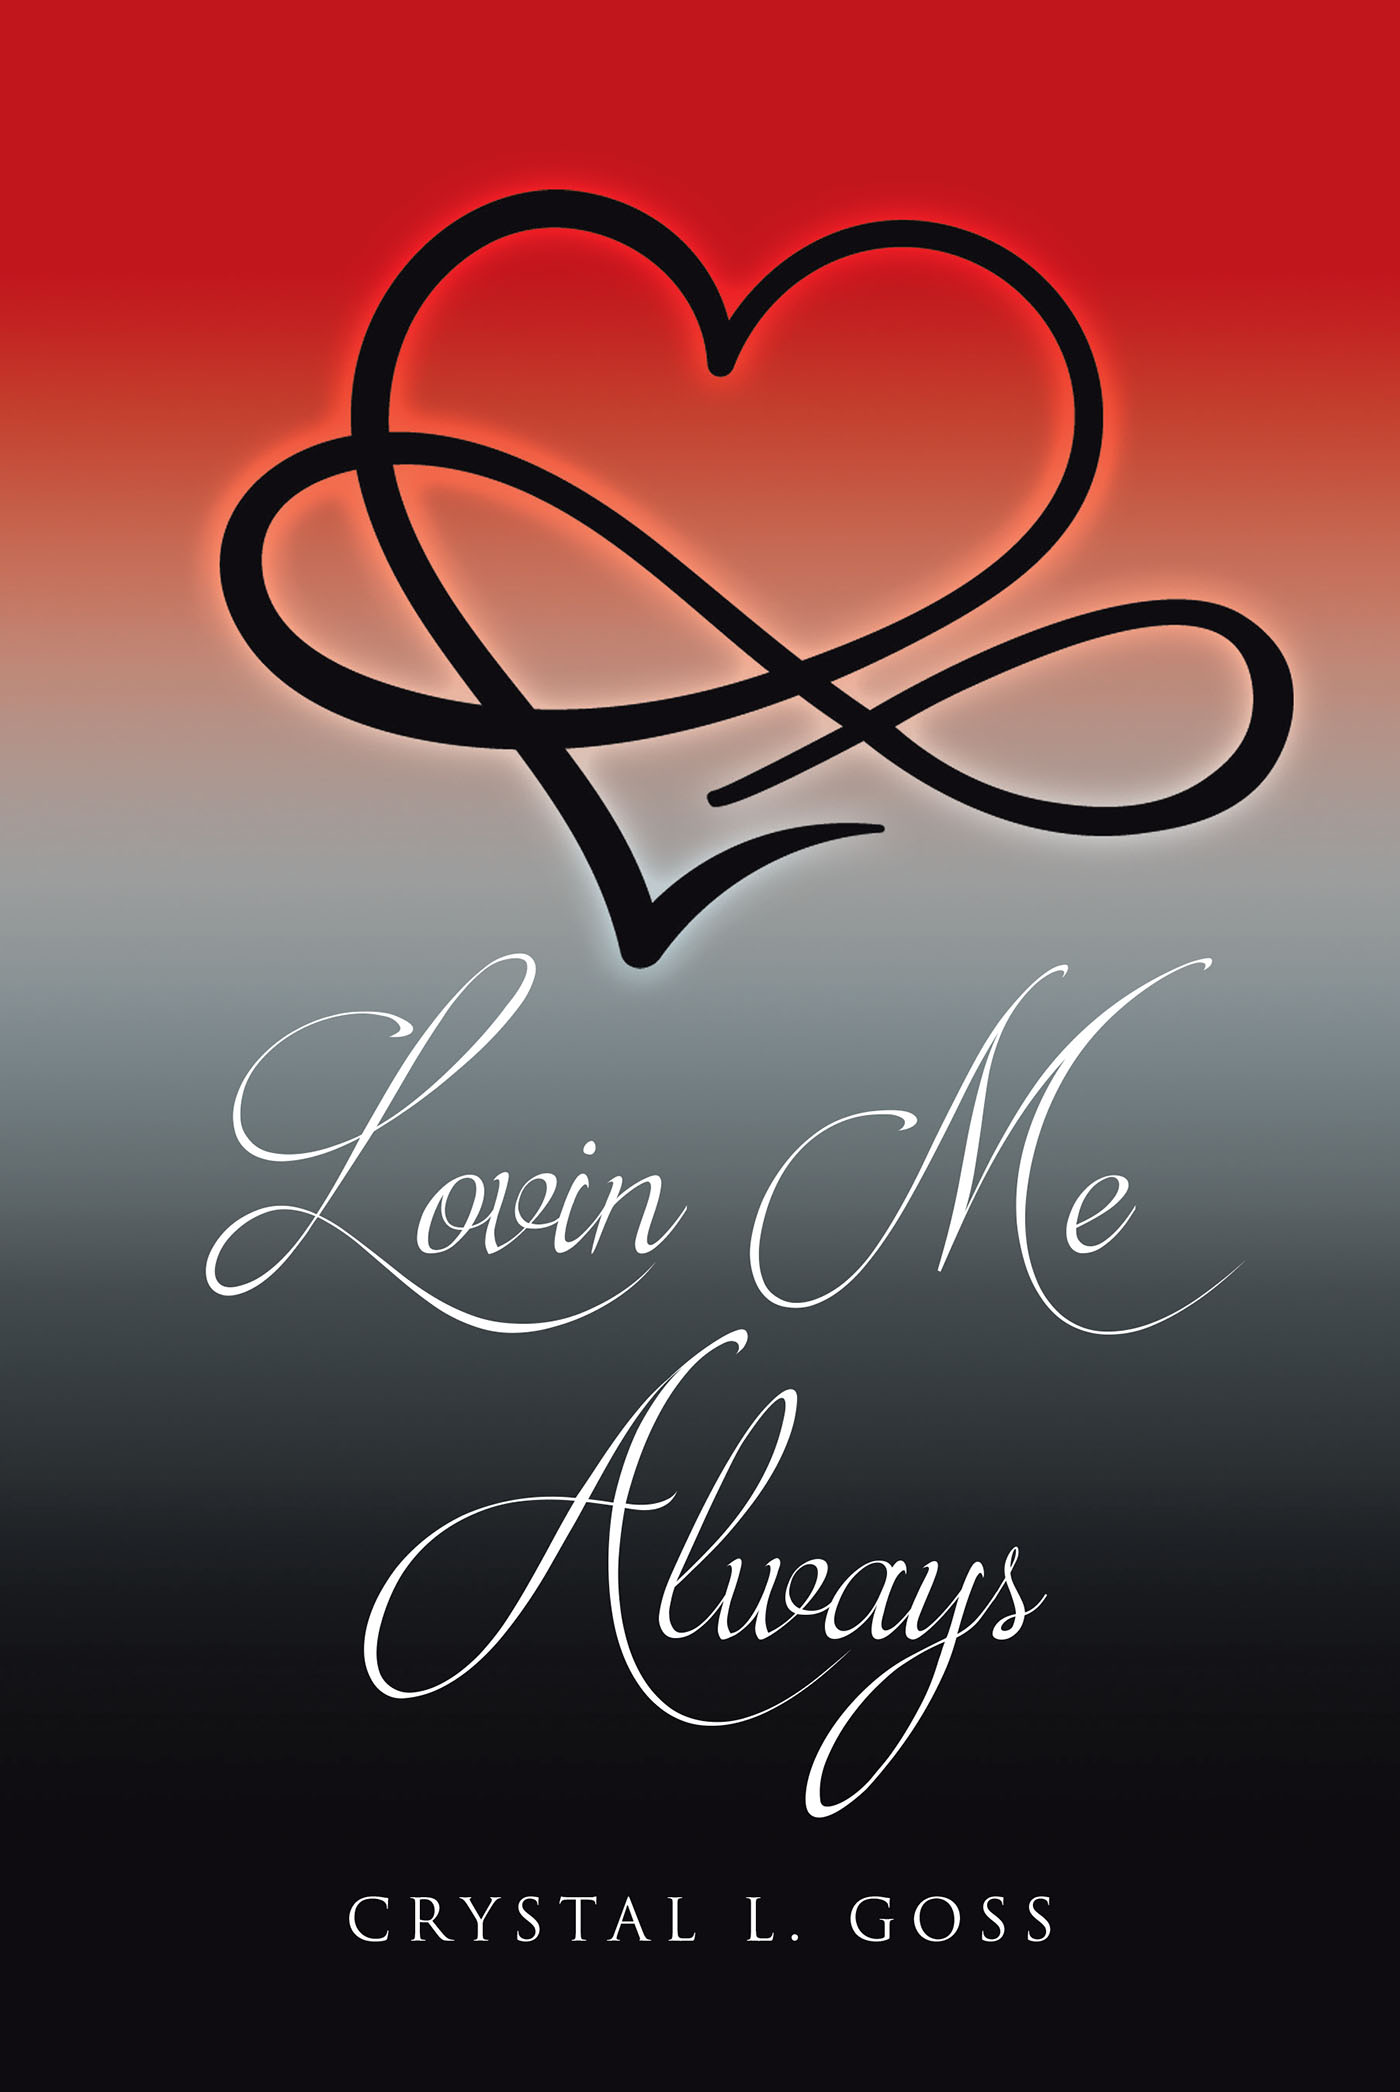 Author Crystal L. Goss’s New Book, "Lovin Me Always," is a Collection of Poetry That Offers Endless Hope and Encouragement to All Readers